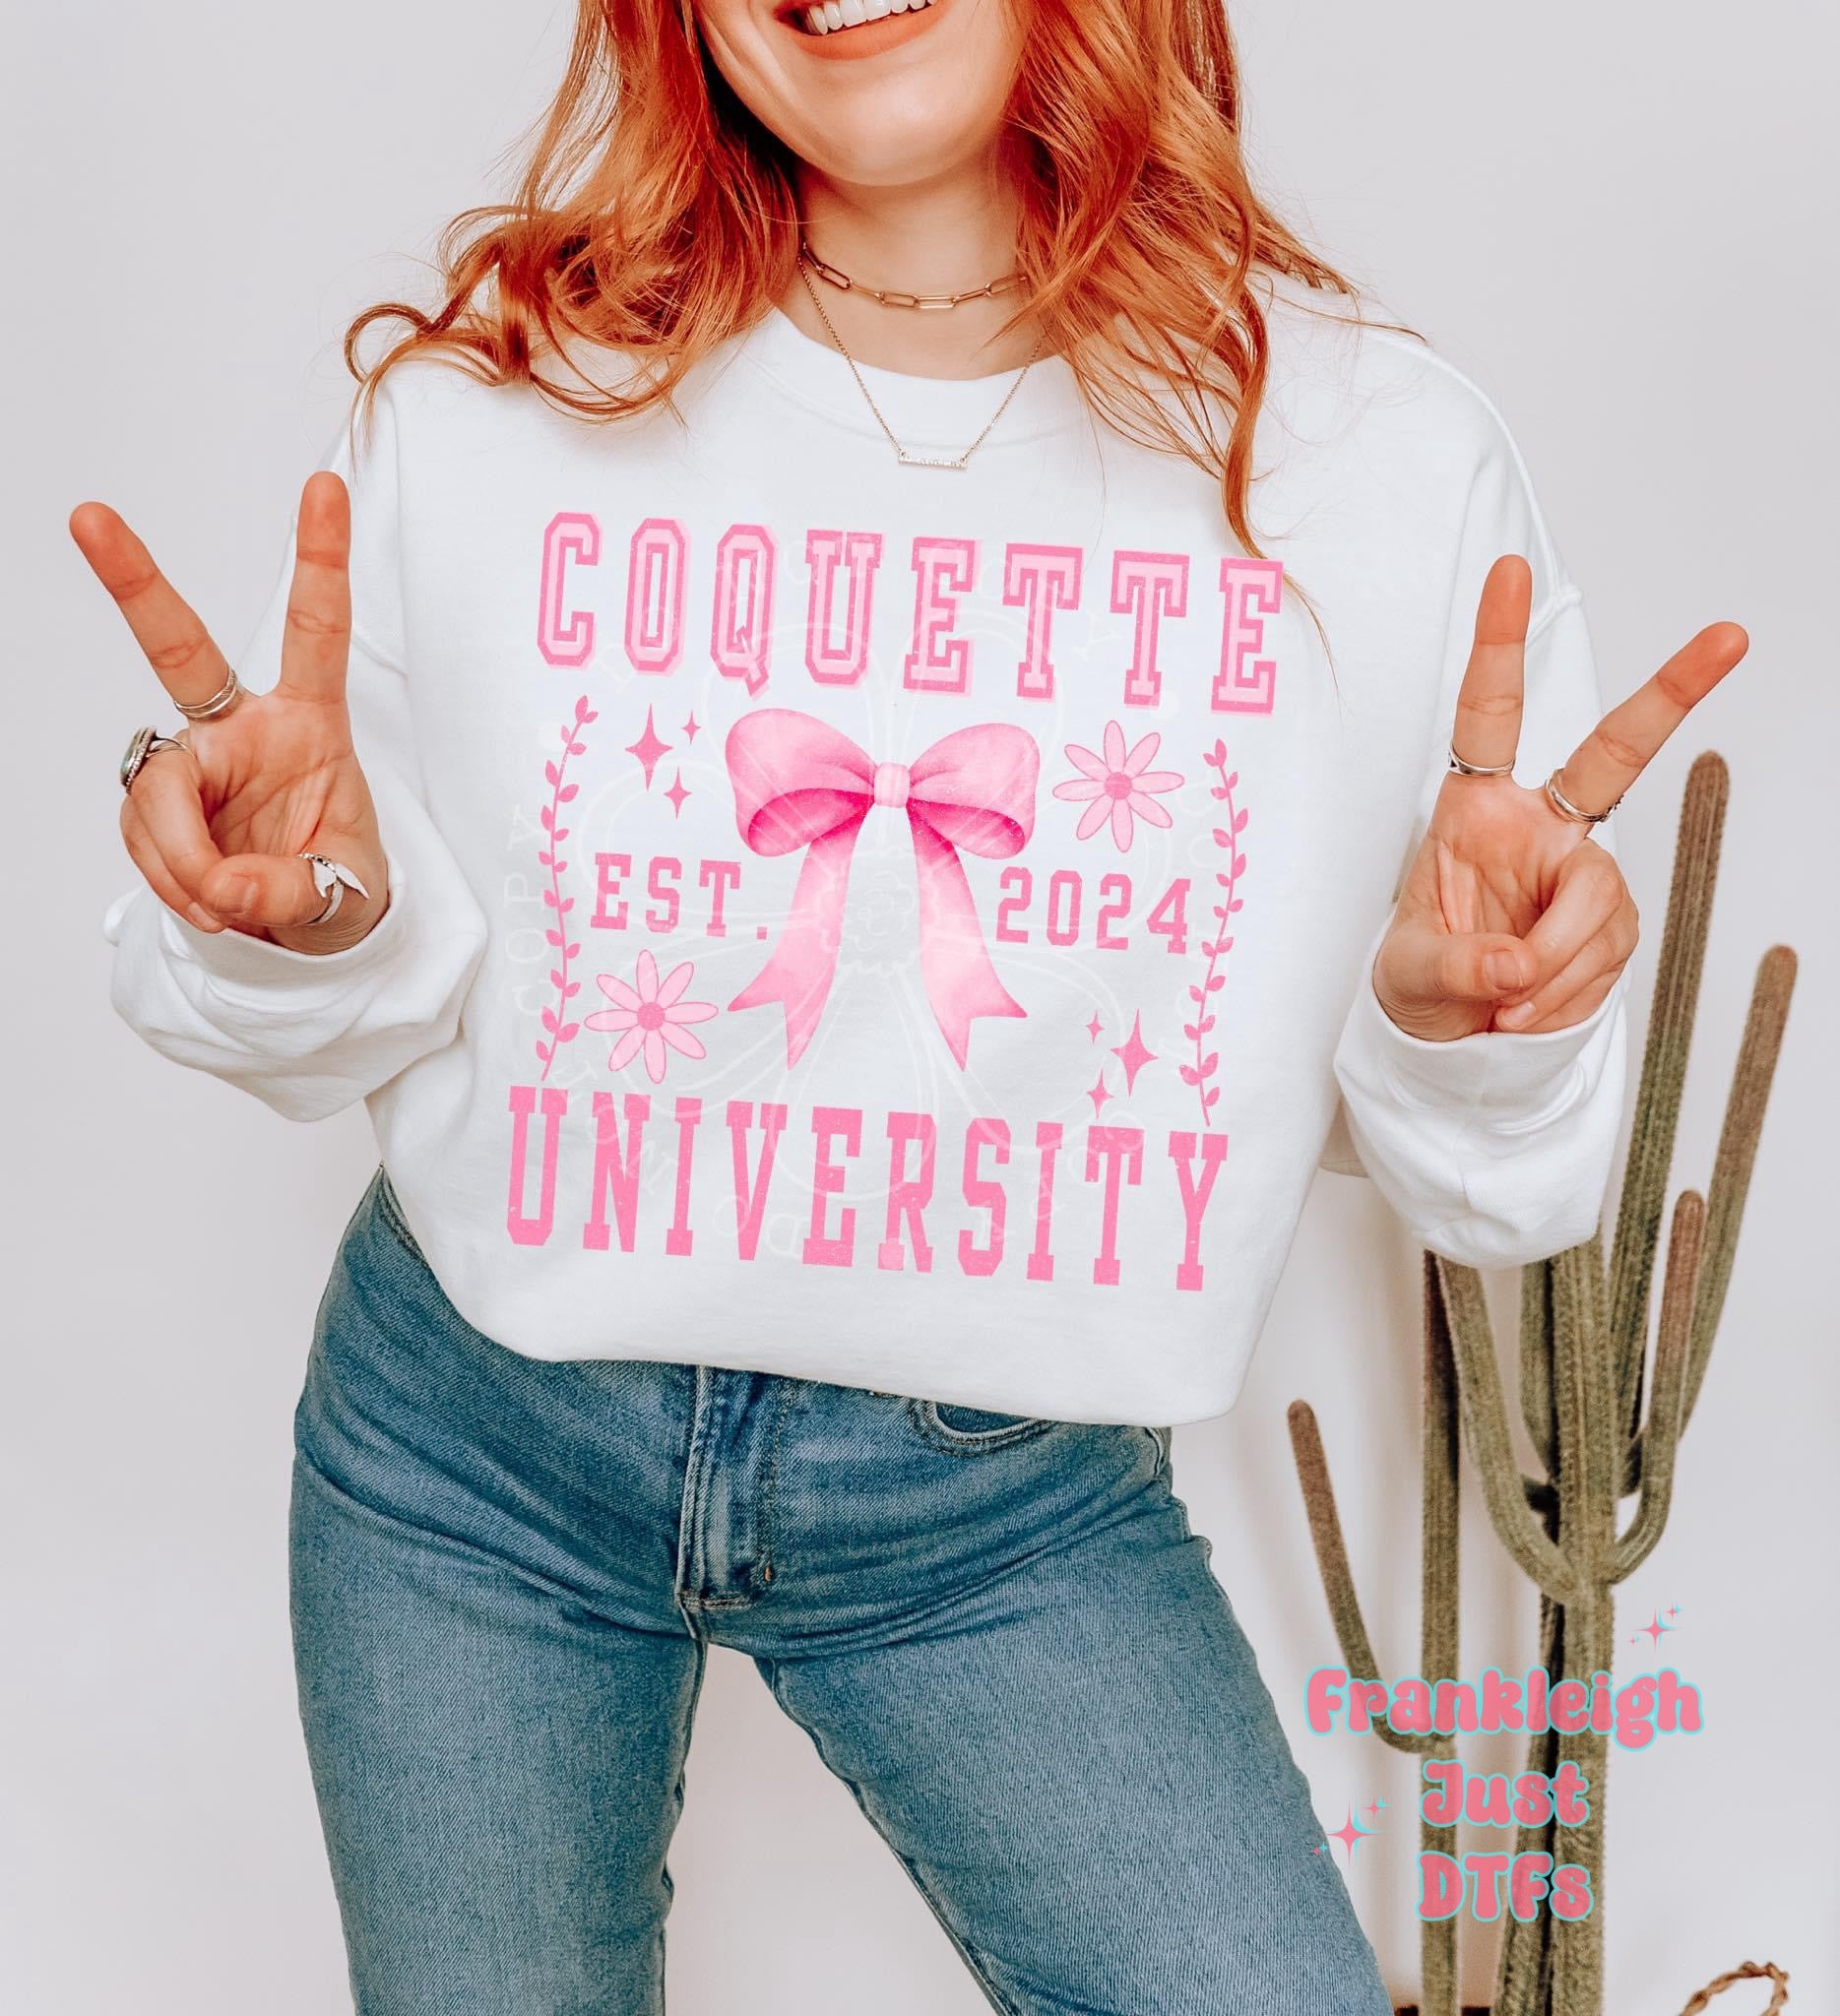 Coquette University – Frankleigh just DTFs